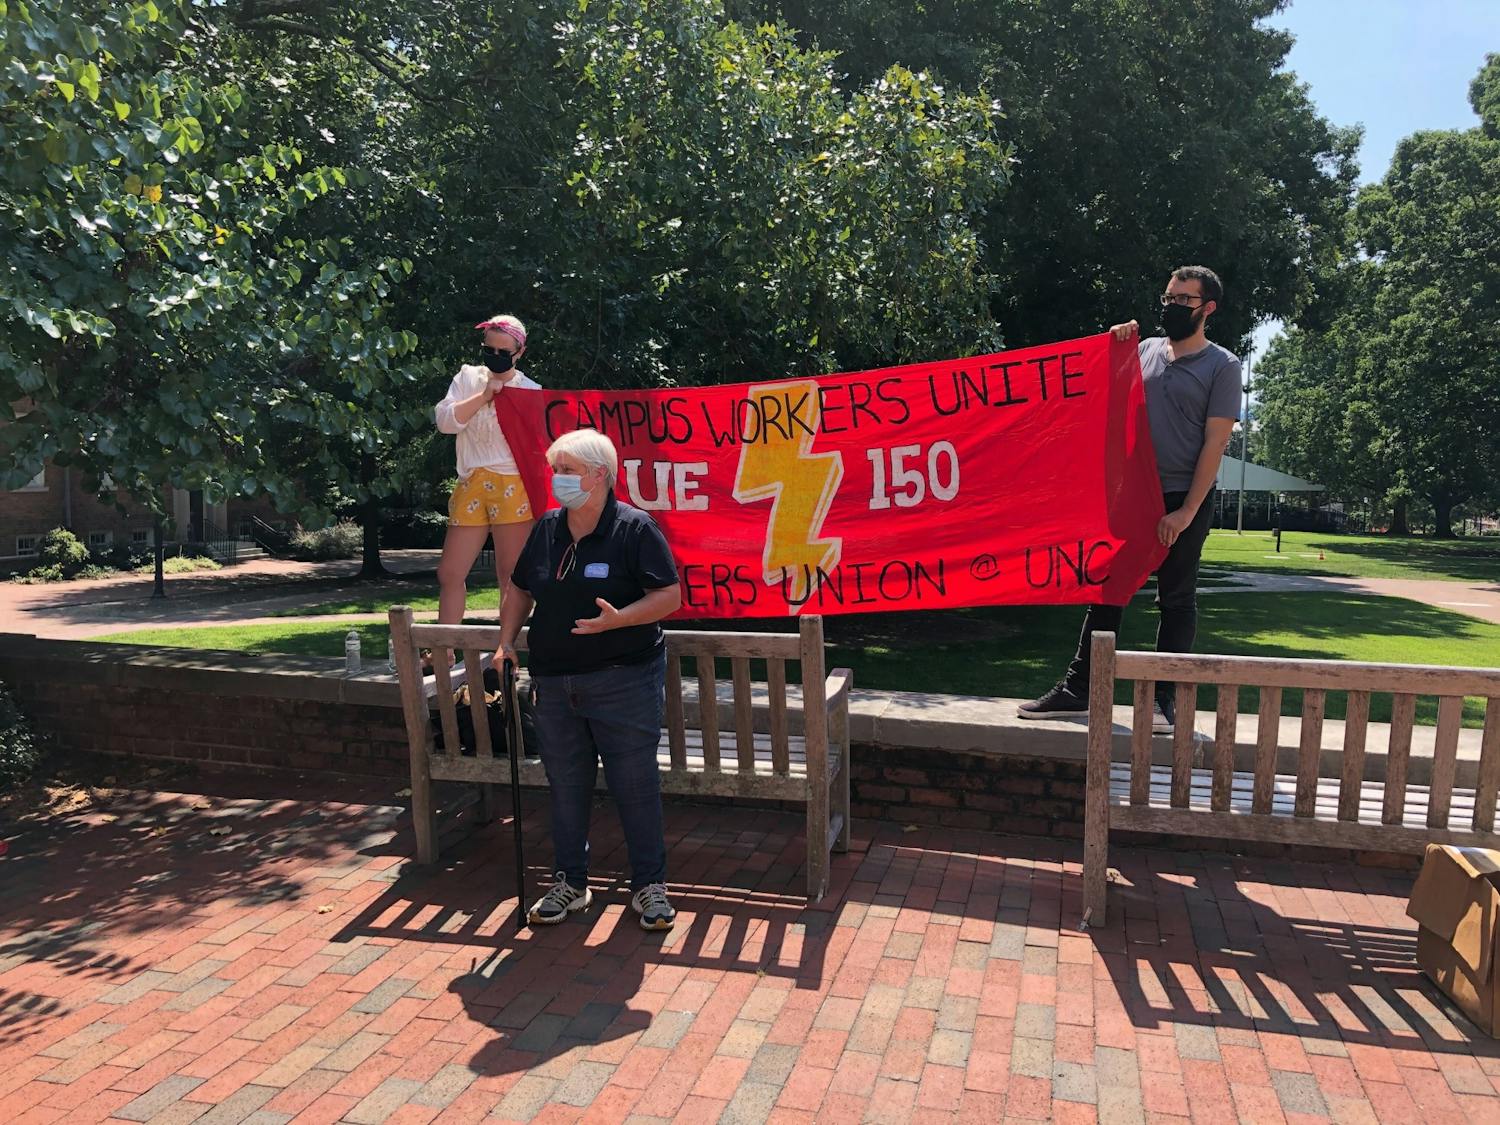 UNC community members hold a sign advocating for UE Local 150, the North Carolina Public Service Workers Union, at their protest on Thursday, Aug. 27, 2020.